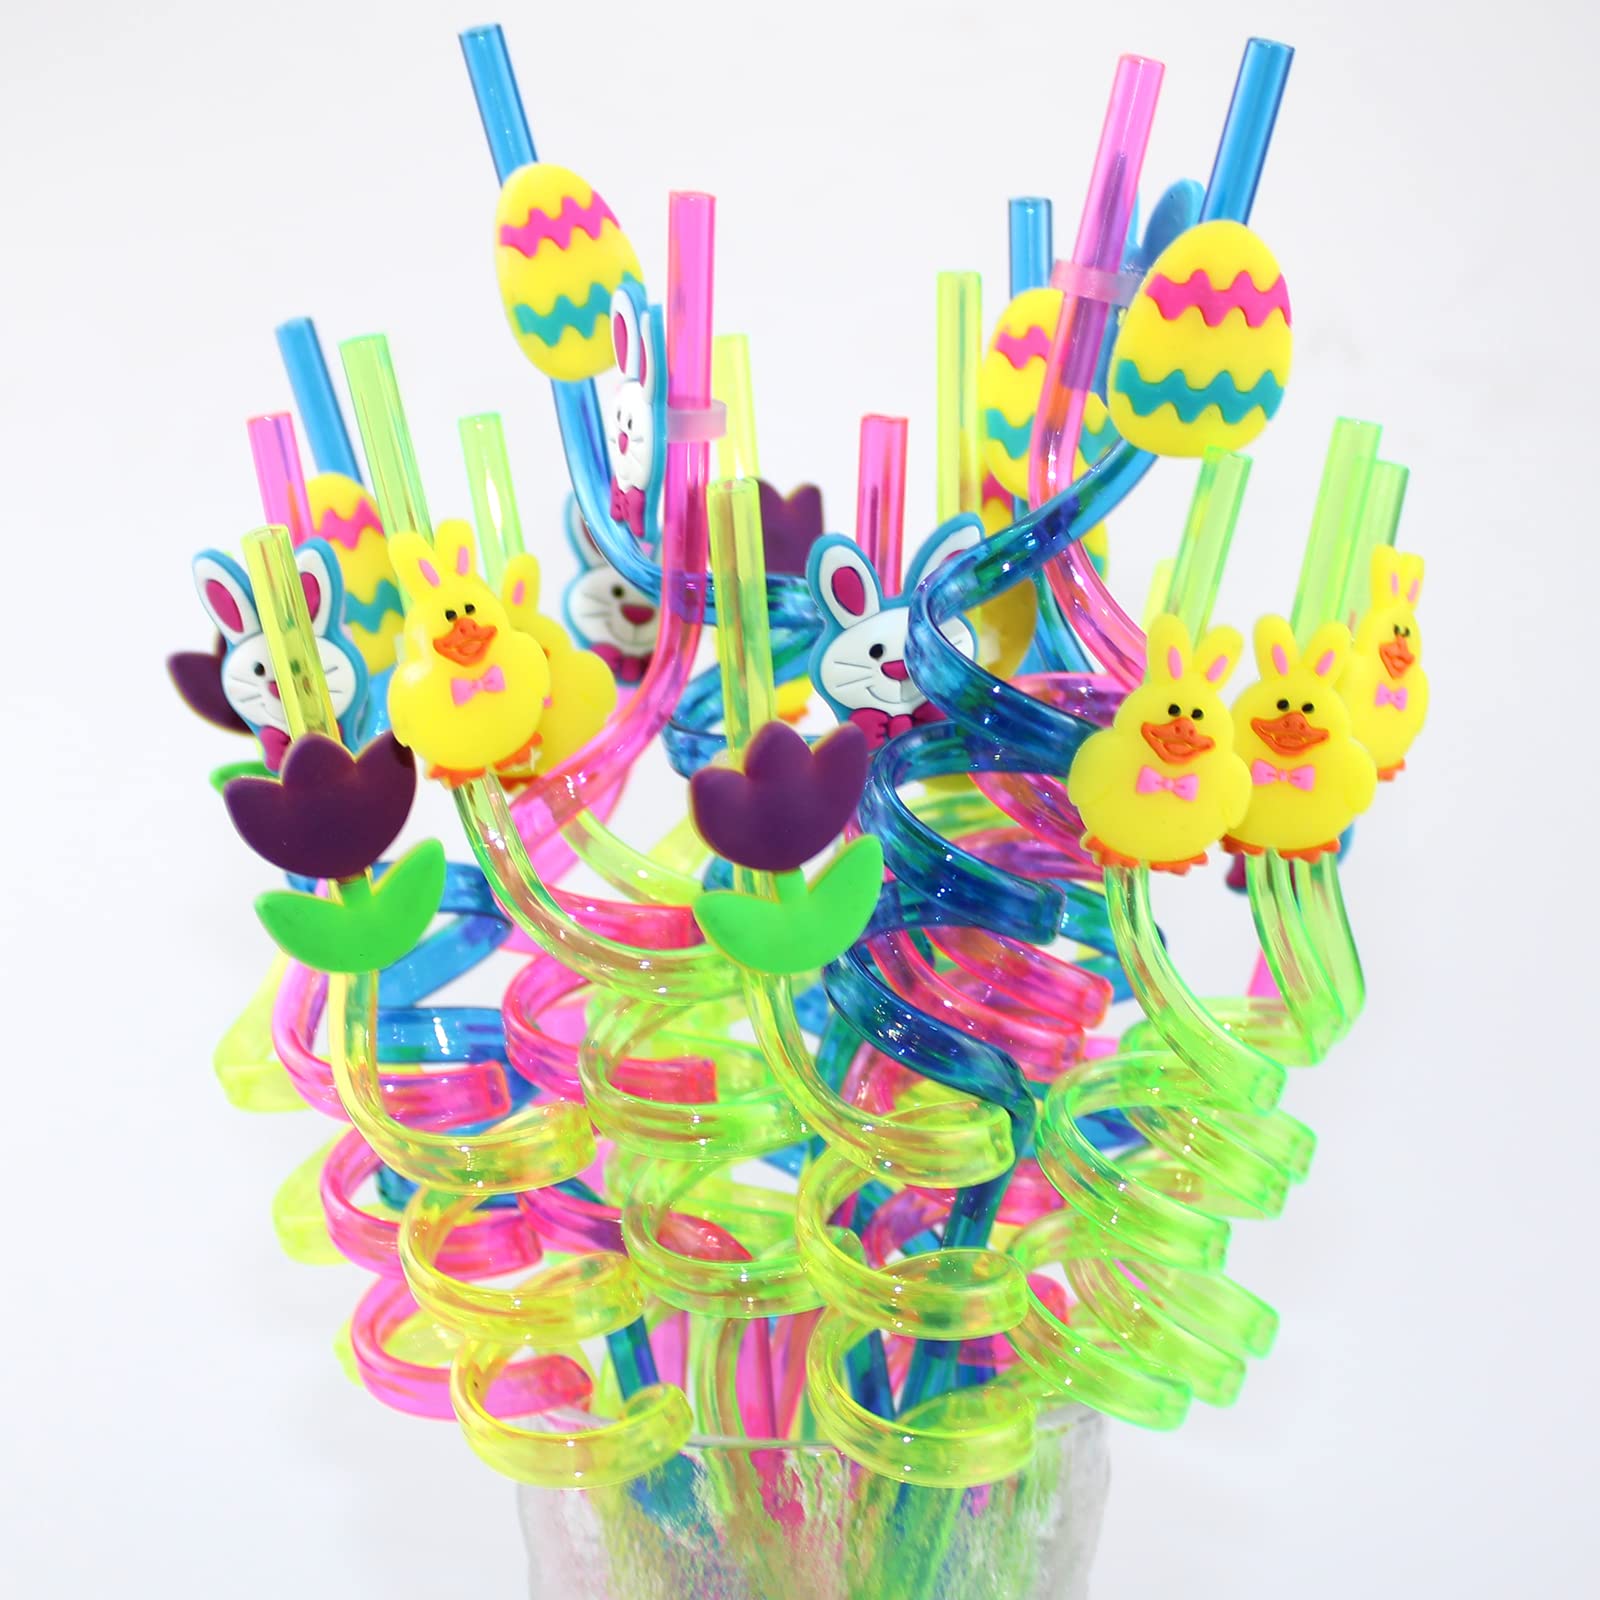 24PC Easter Party Favors,Silly Straws for Kids Easter Egg Bunny Straws Chicken Bunny Egg and Flower Drinking Straws for Easter Party Supplies with (Easter straw)